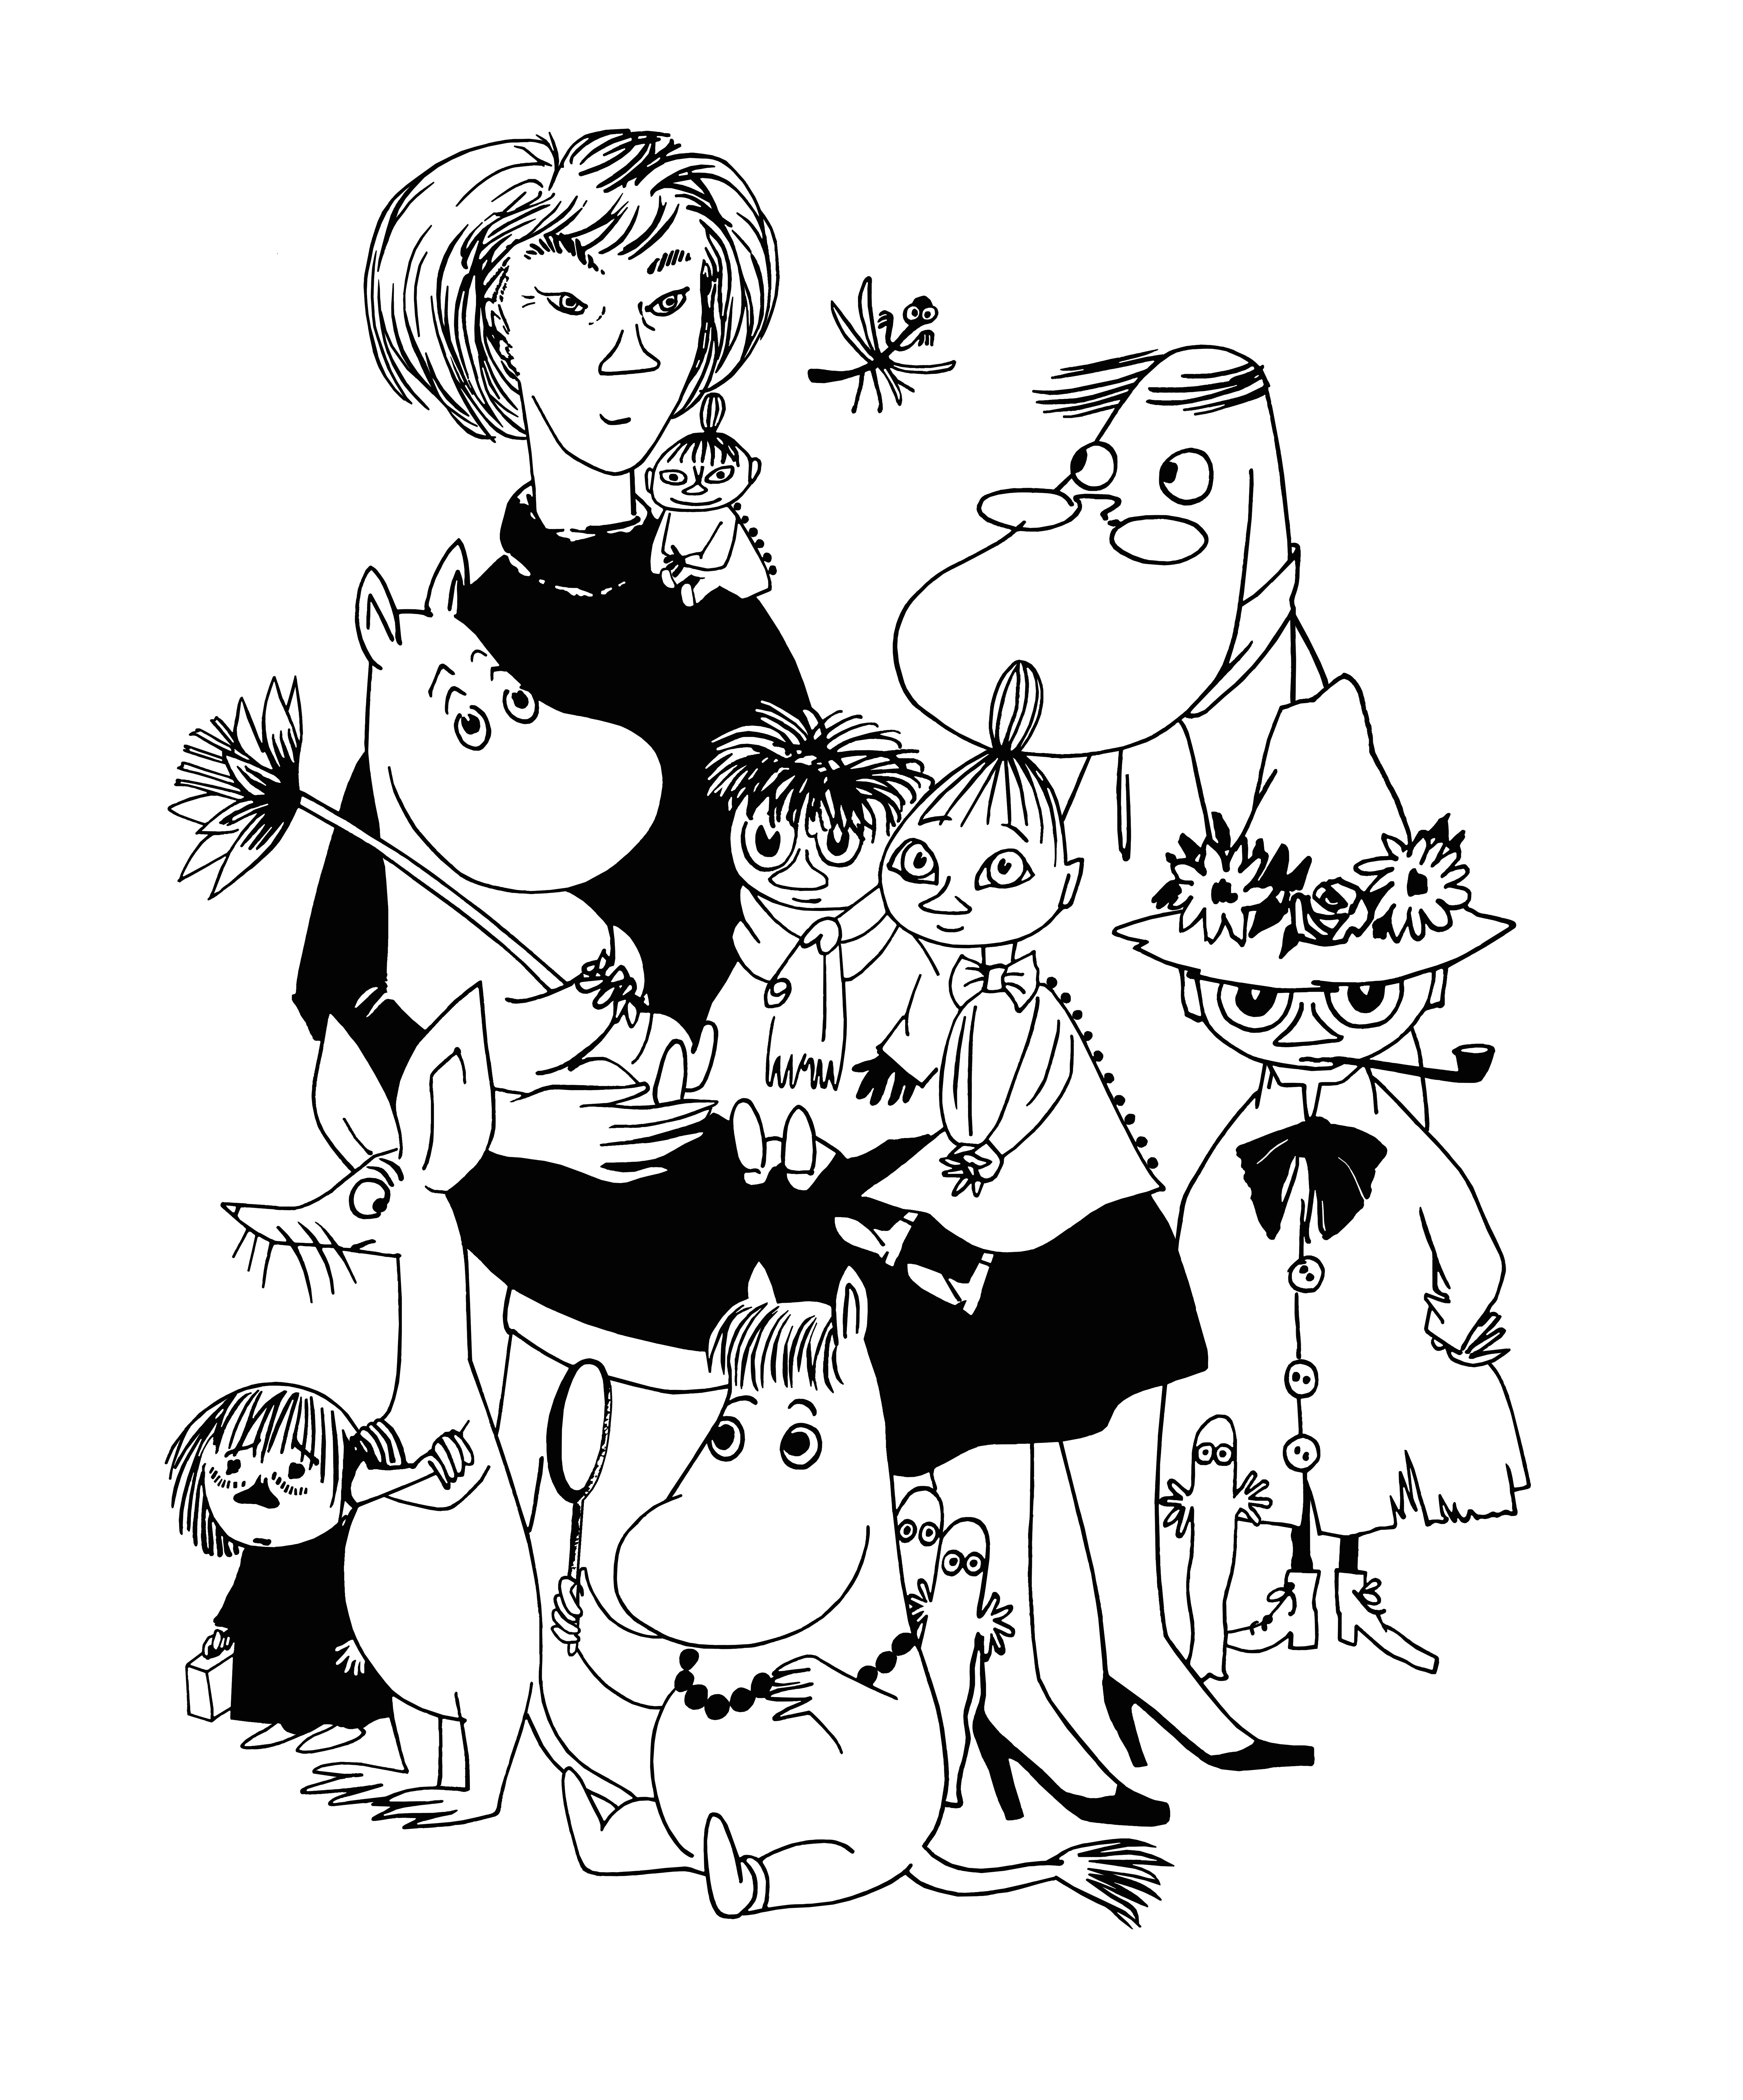 Cartoon Drawing Valley tove Jansson Self Portrait with some the Characters She Created